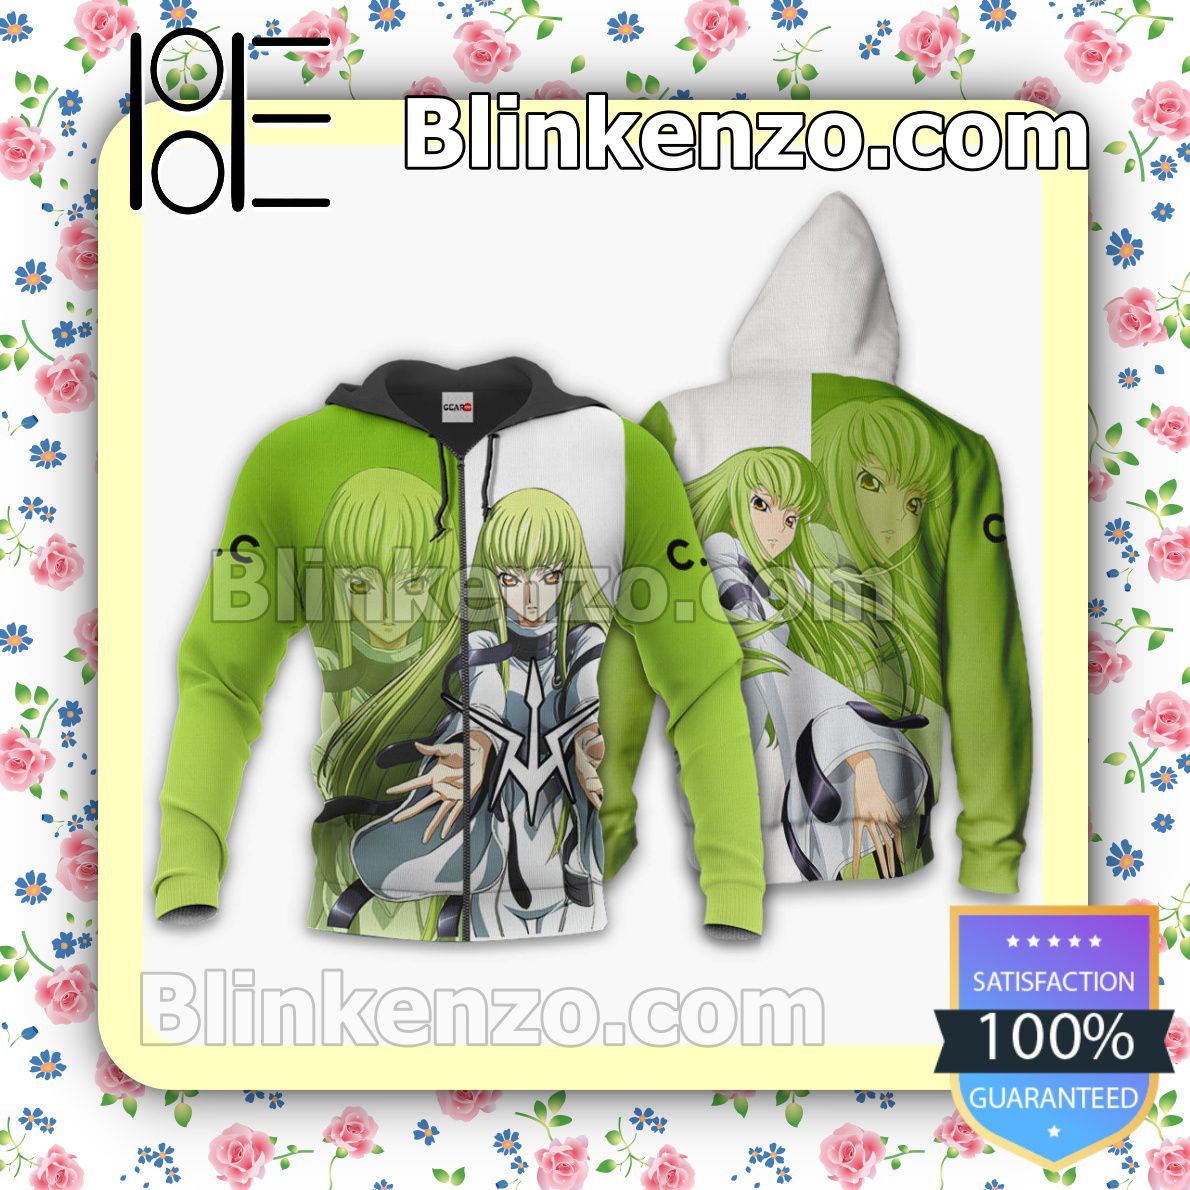 C.C. Code Geass Anime Personalized T-shirt, Hoodie, Long Sleeve, Bomber Jacket